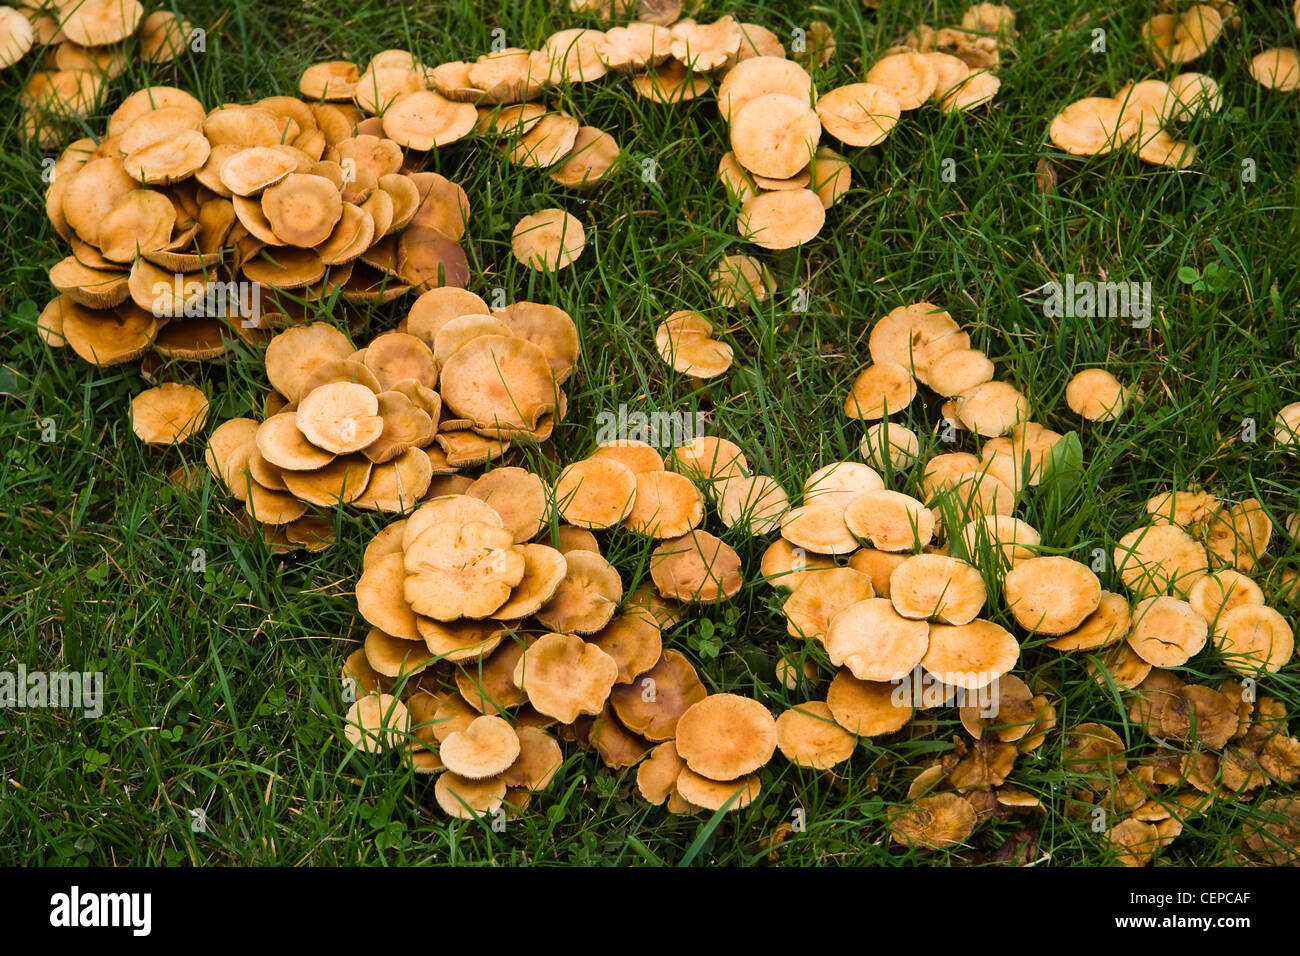 Mushrooms growing in a circle as a fairy ring in the grass in autumn Stock Photo